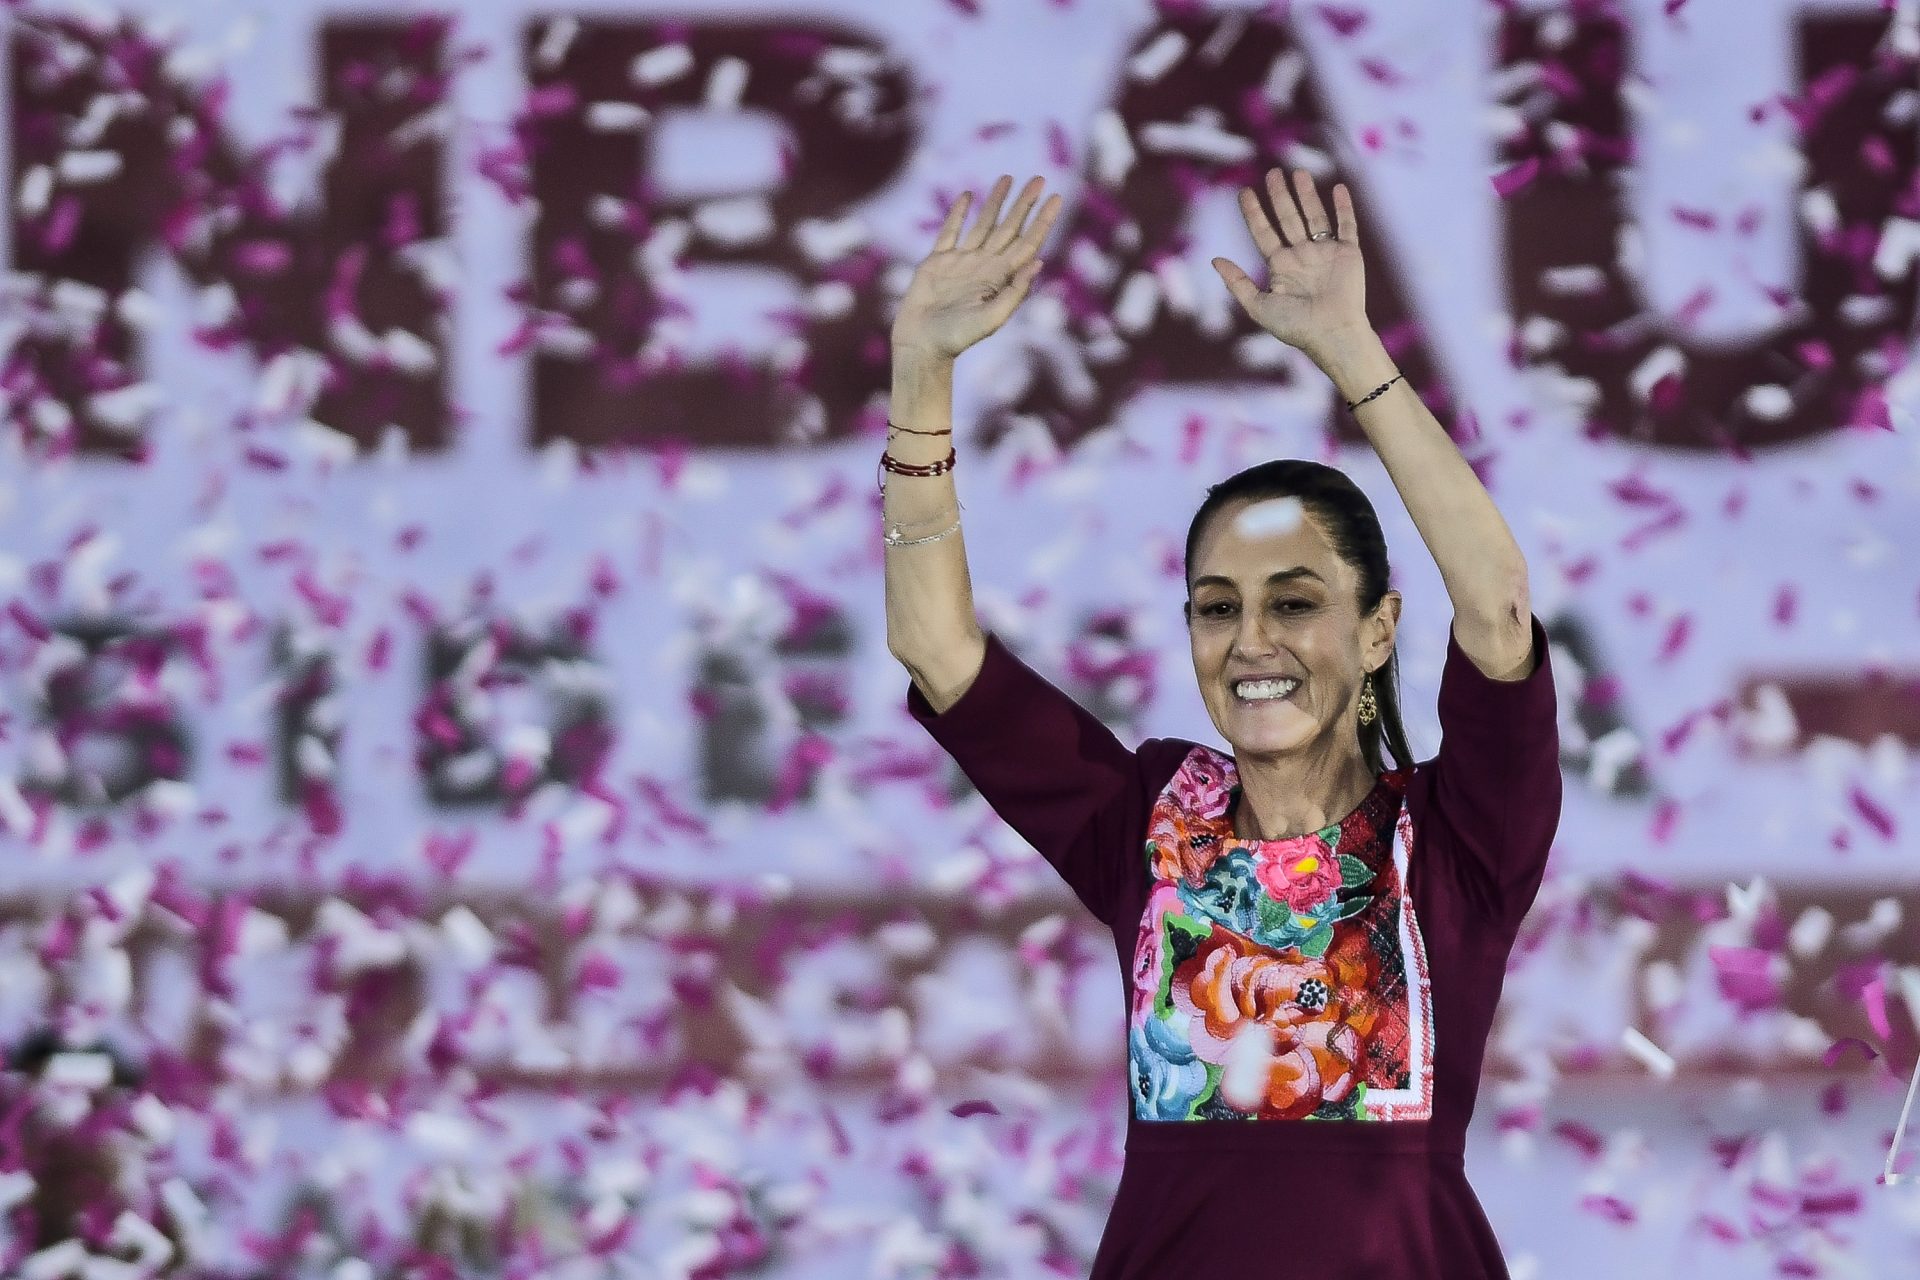 Mexico just elected its first female president, but will ‘macho culture’ go away?